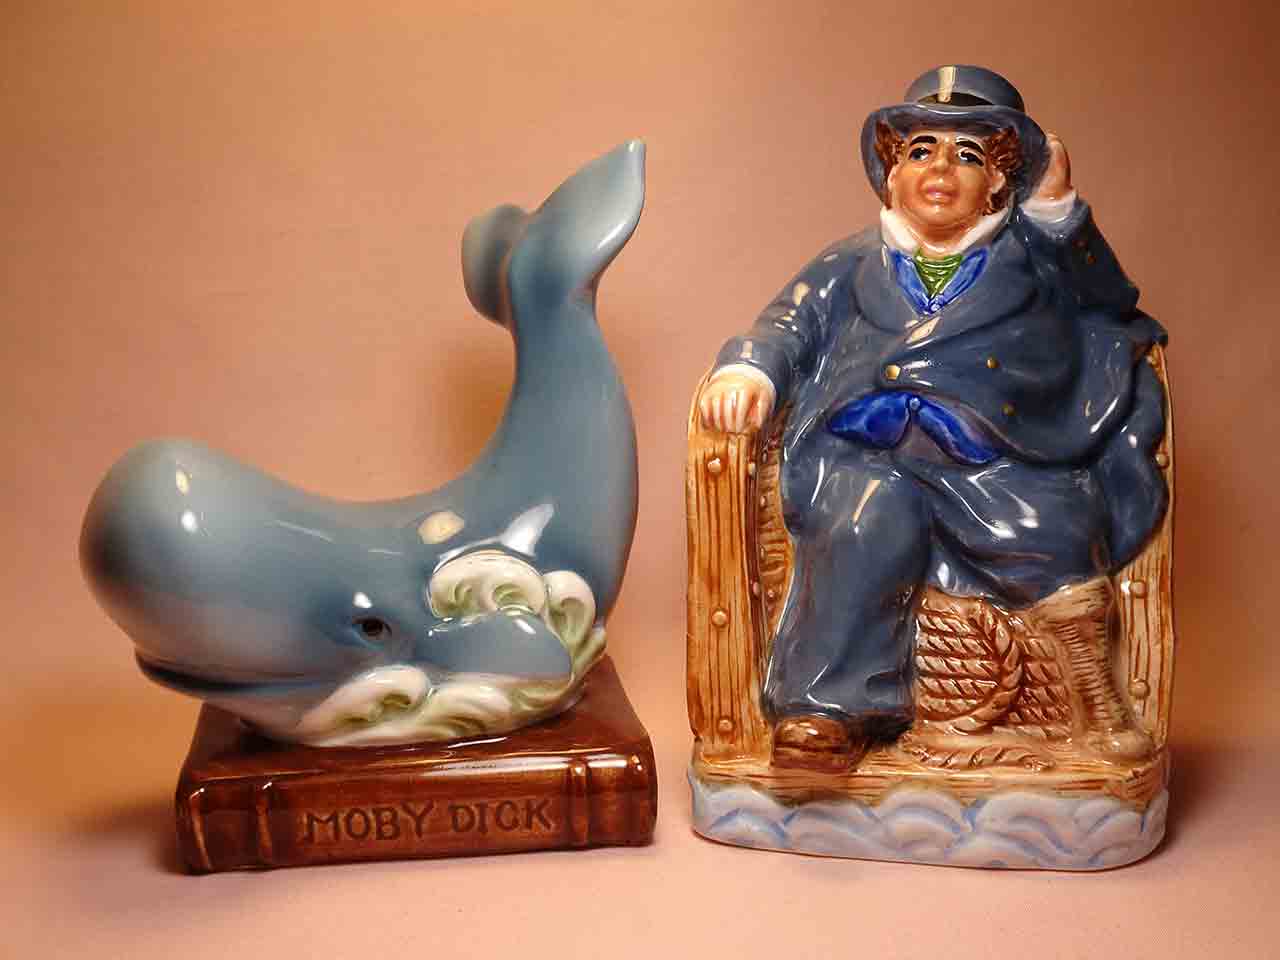 American Folklore series of salt and pepper shakers - Captain Ahab and Moby Dick